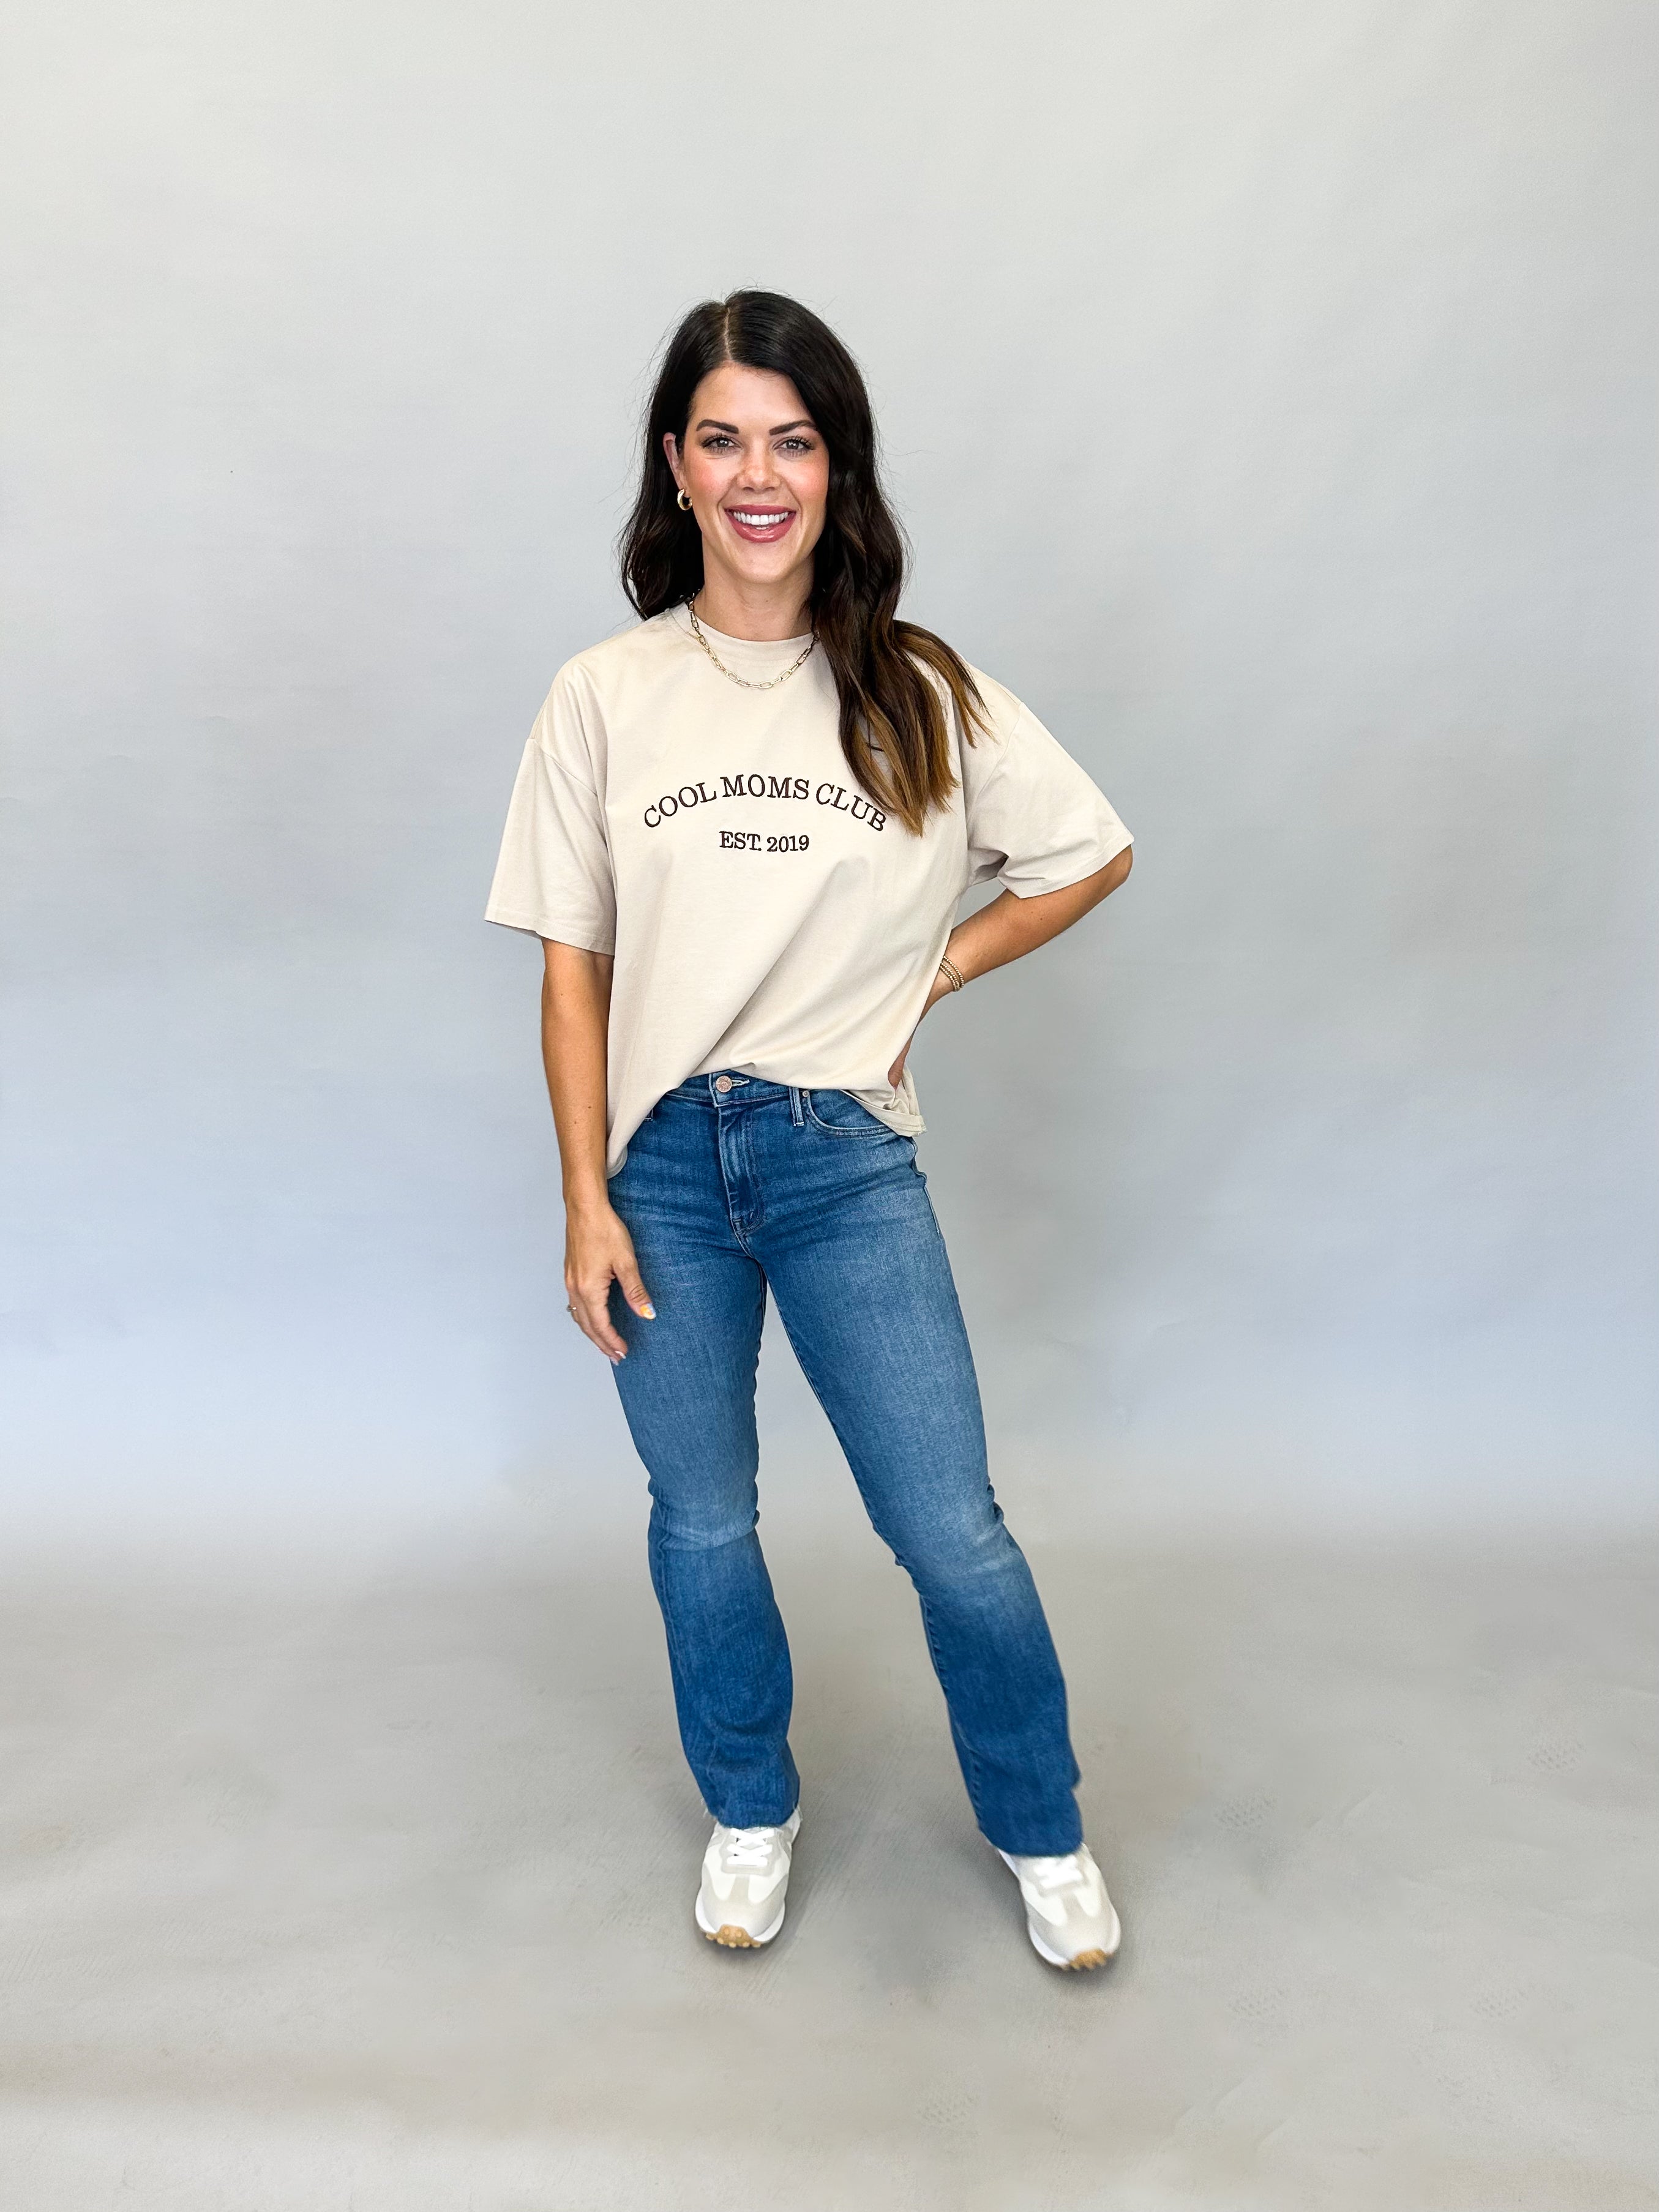 Cool Moms Club Graphic Tee